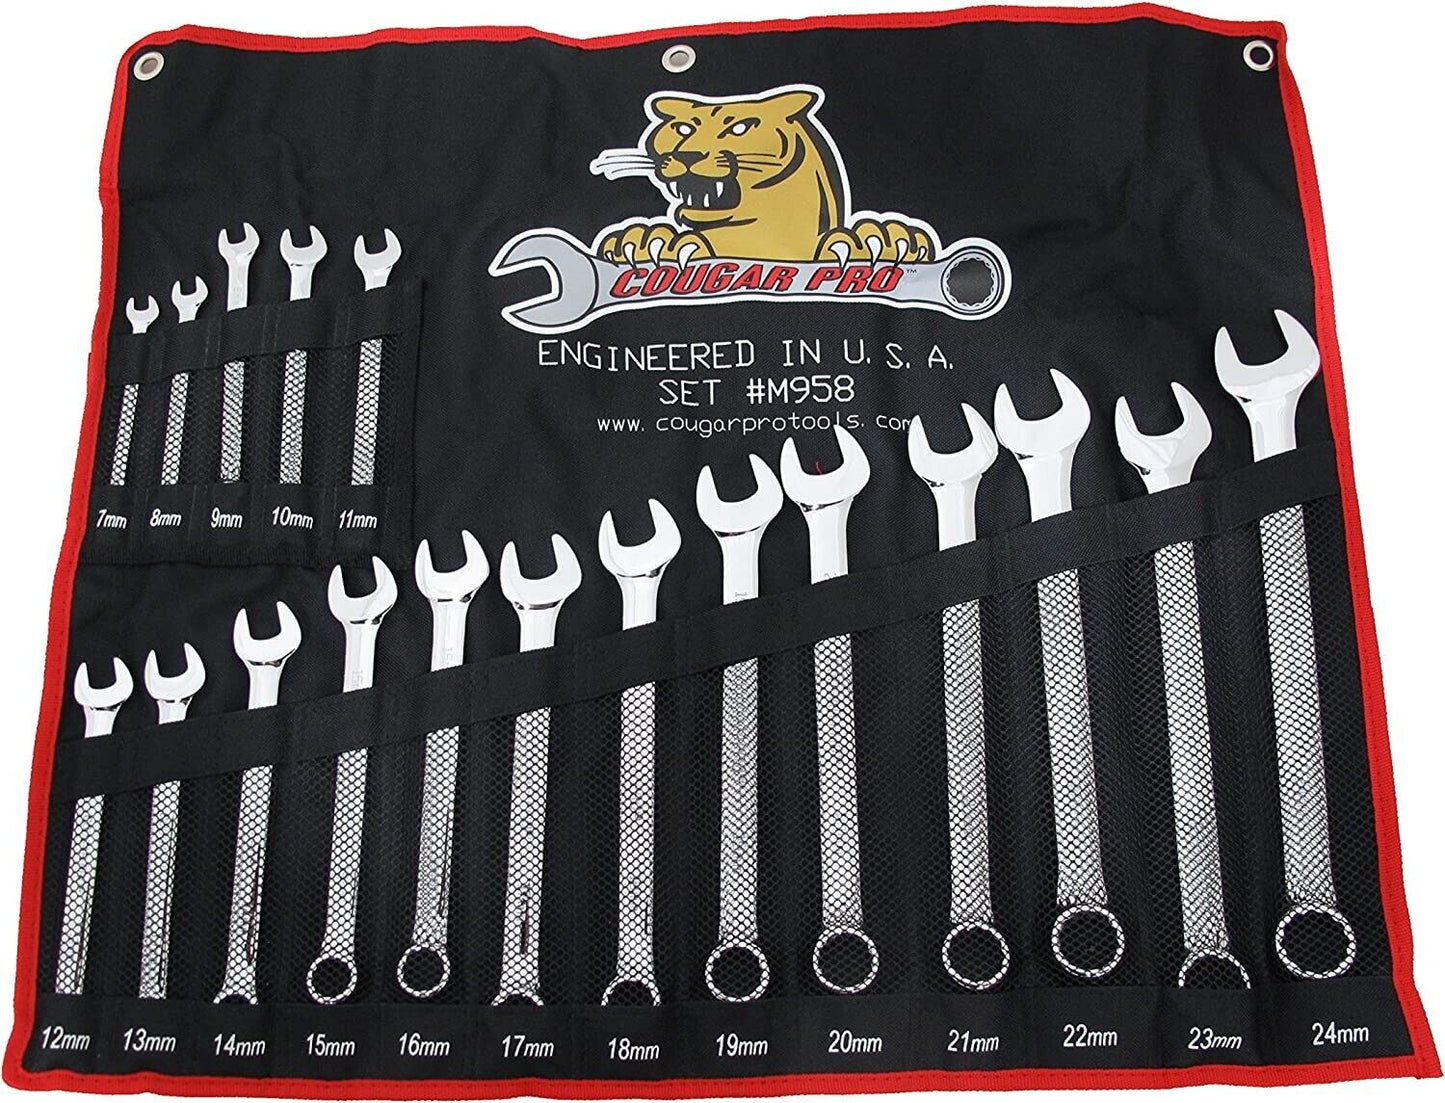 Cougar Pro Combination Wrench Set 18 Piece Metric M958